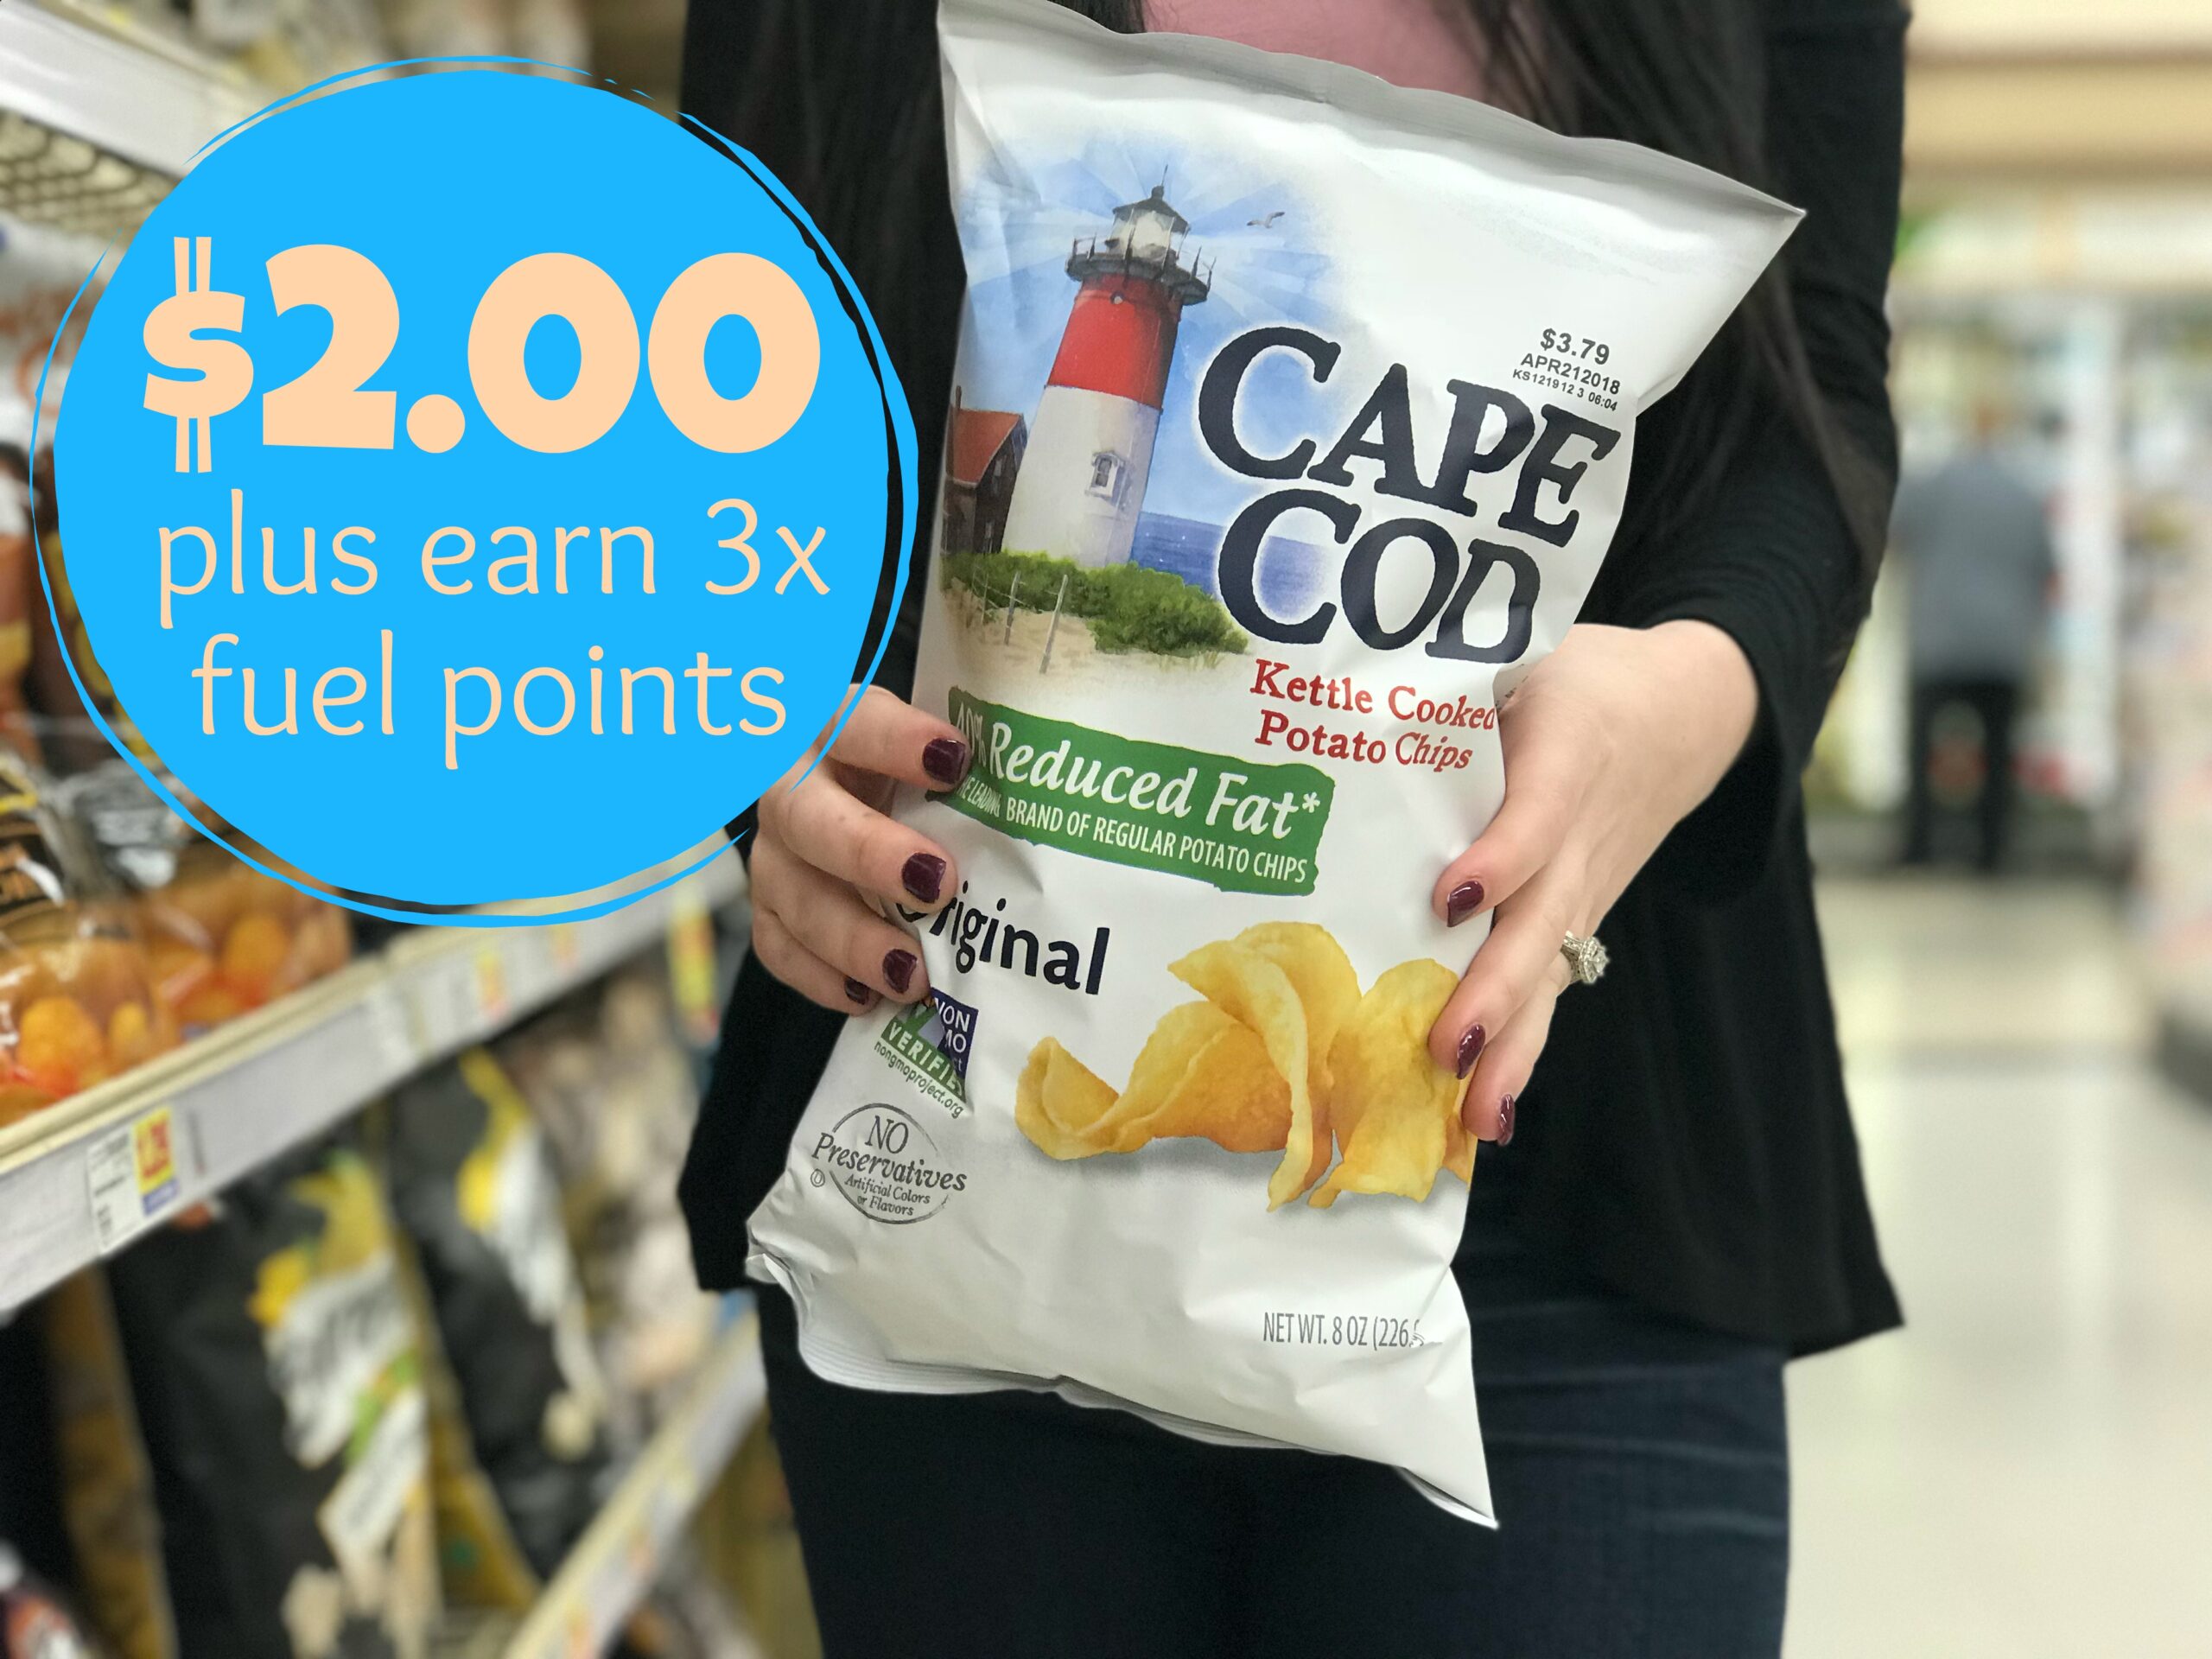 NEW Cape Cod Coupon = Potato Chips for 2.00 at Kroger + Earn 3x Fuel